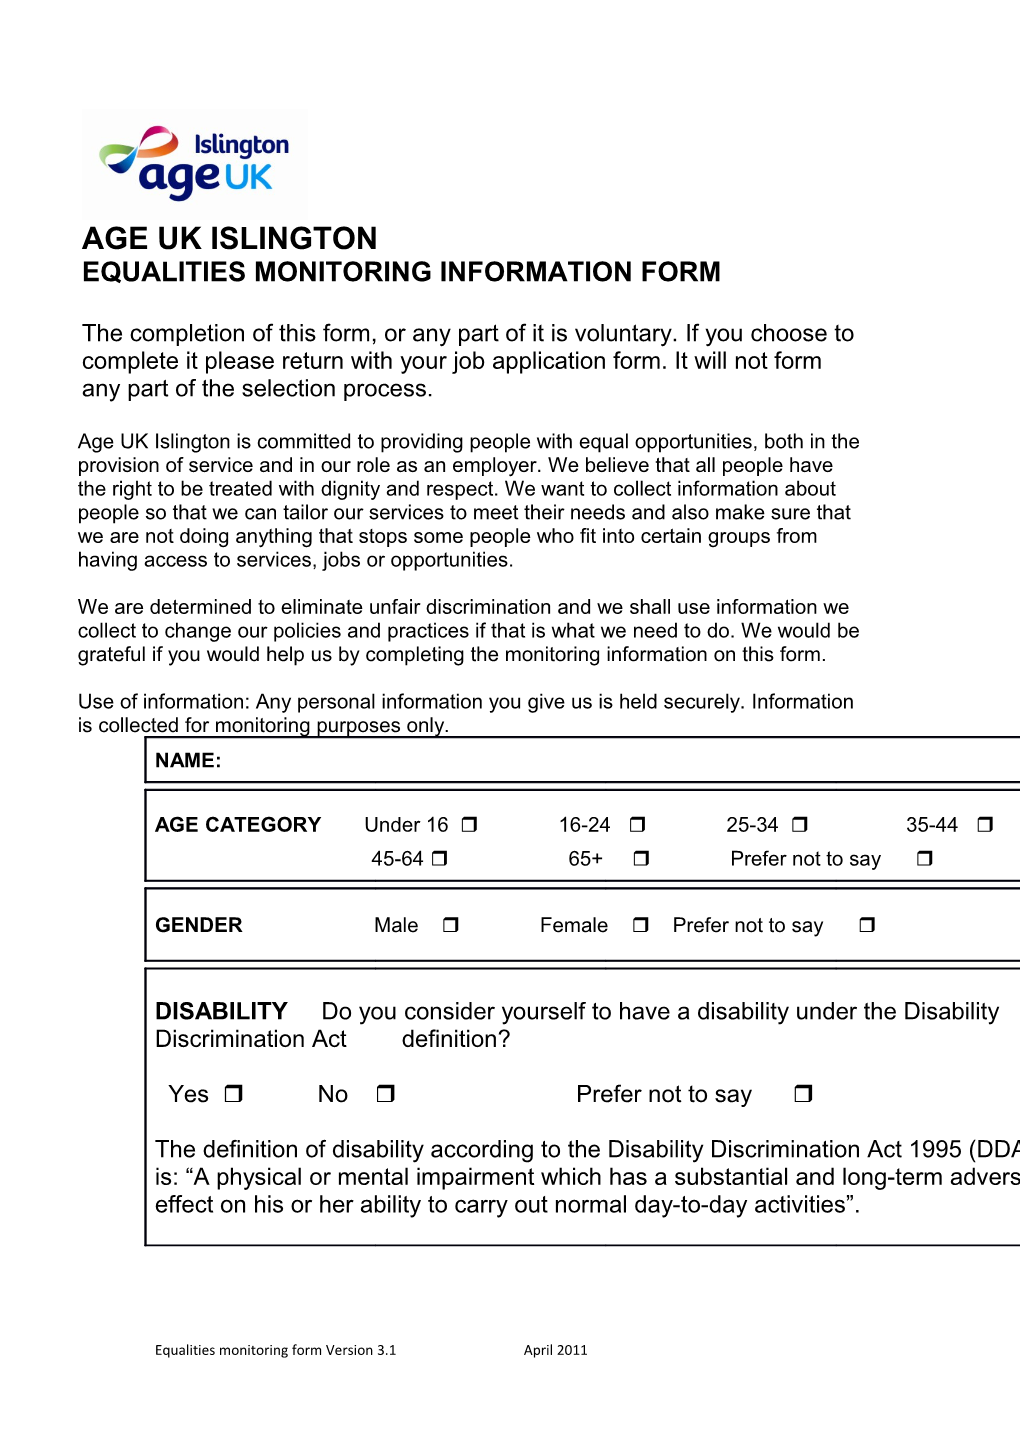 Equalities Monitoring Information Form